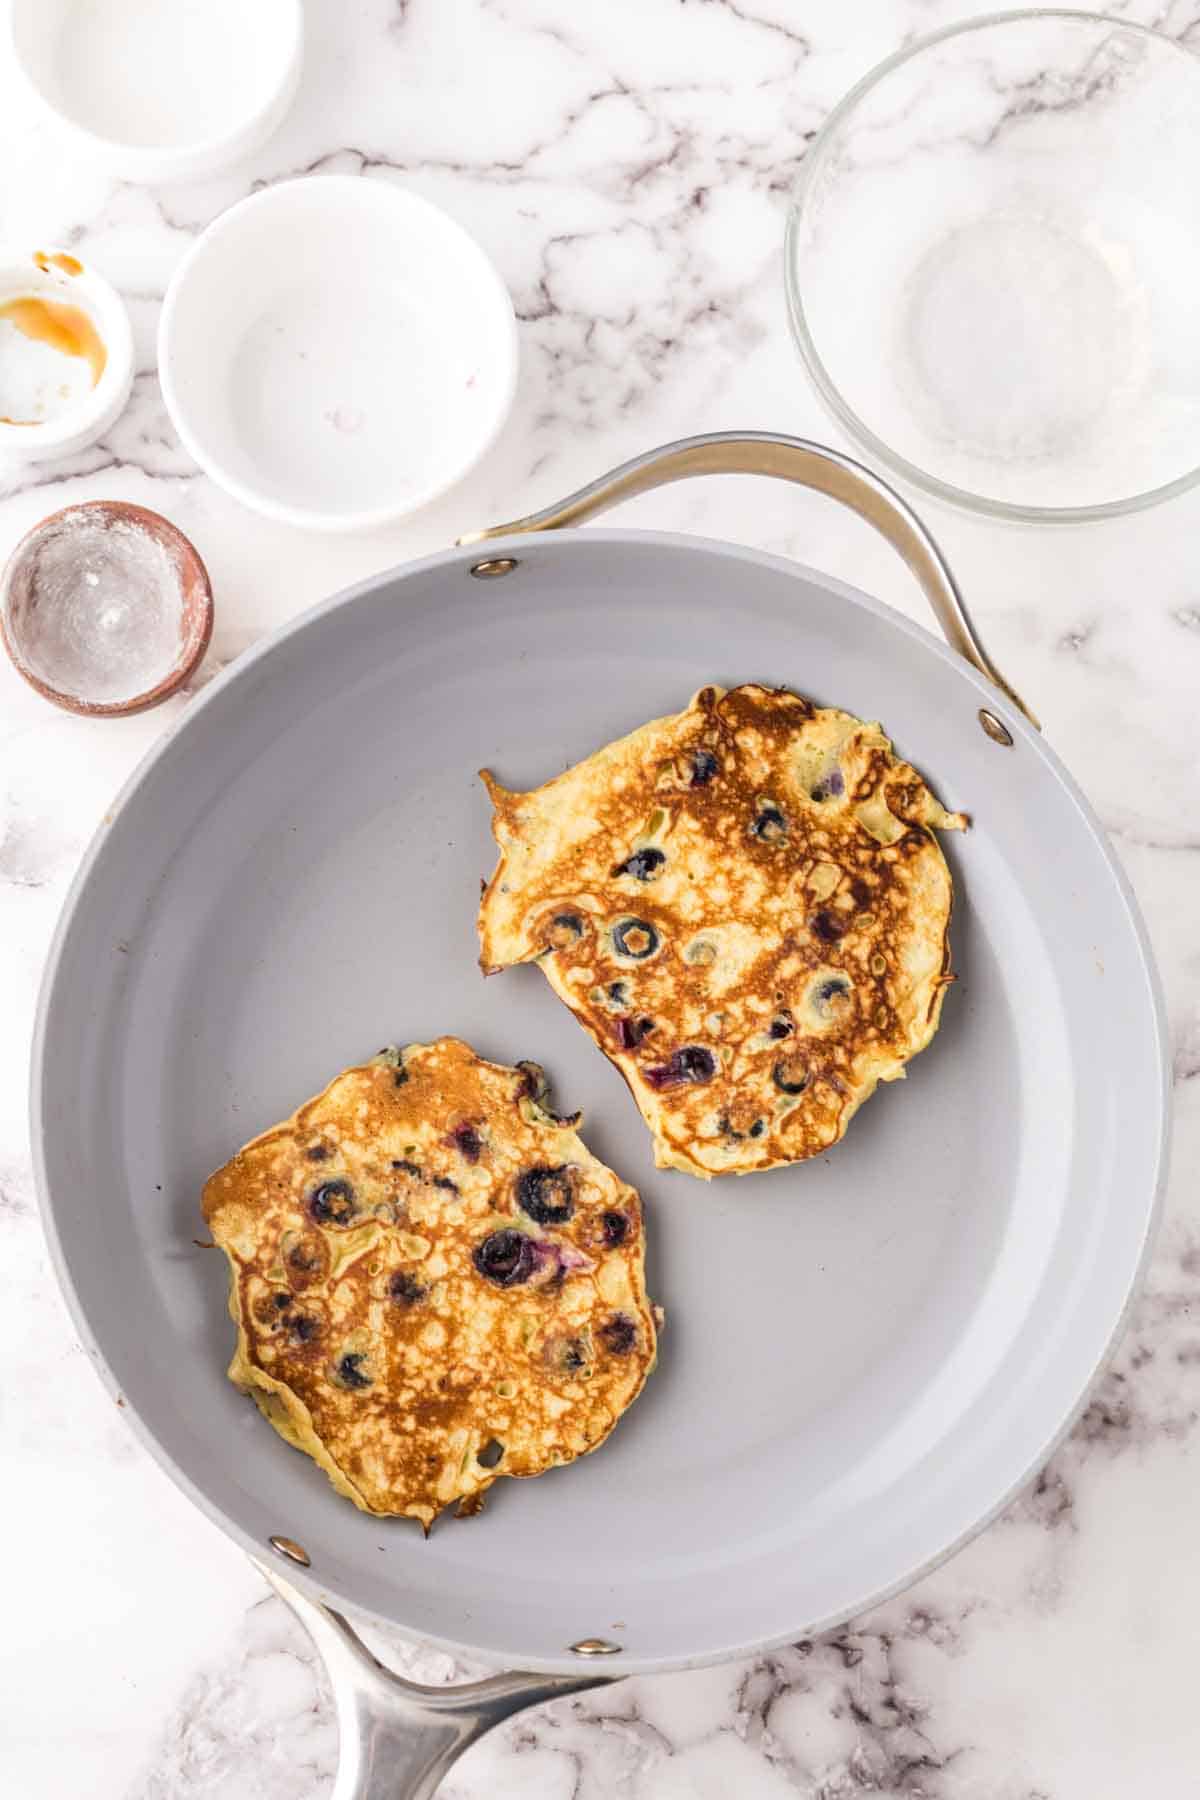 pan with two cooked blueberry pancakes